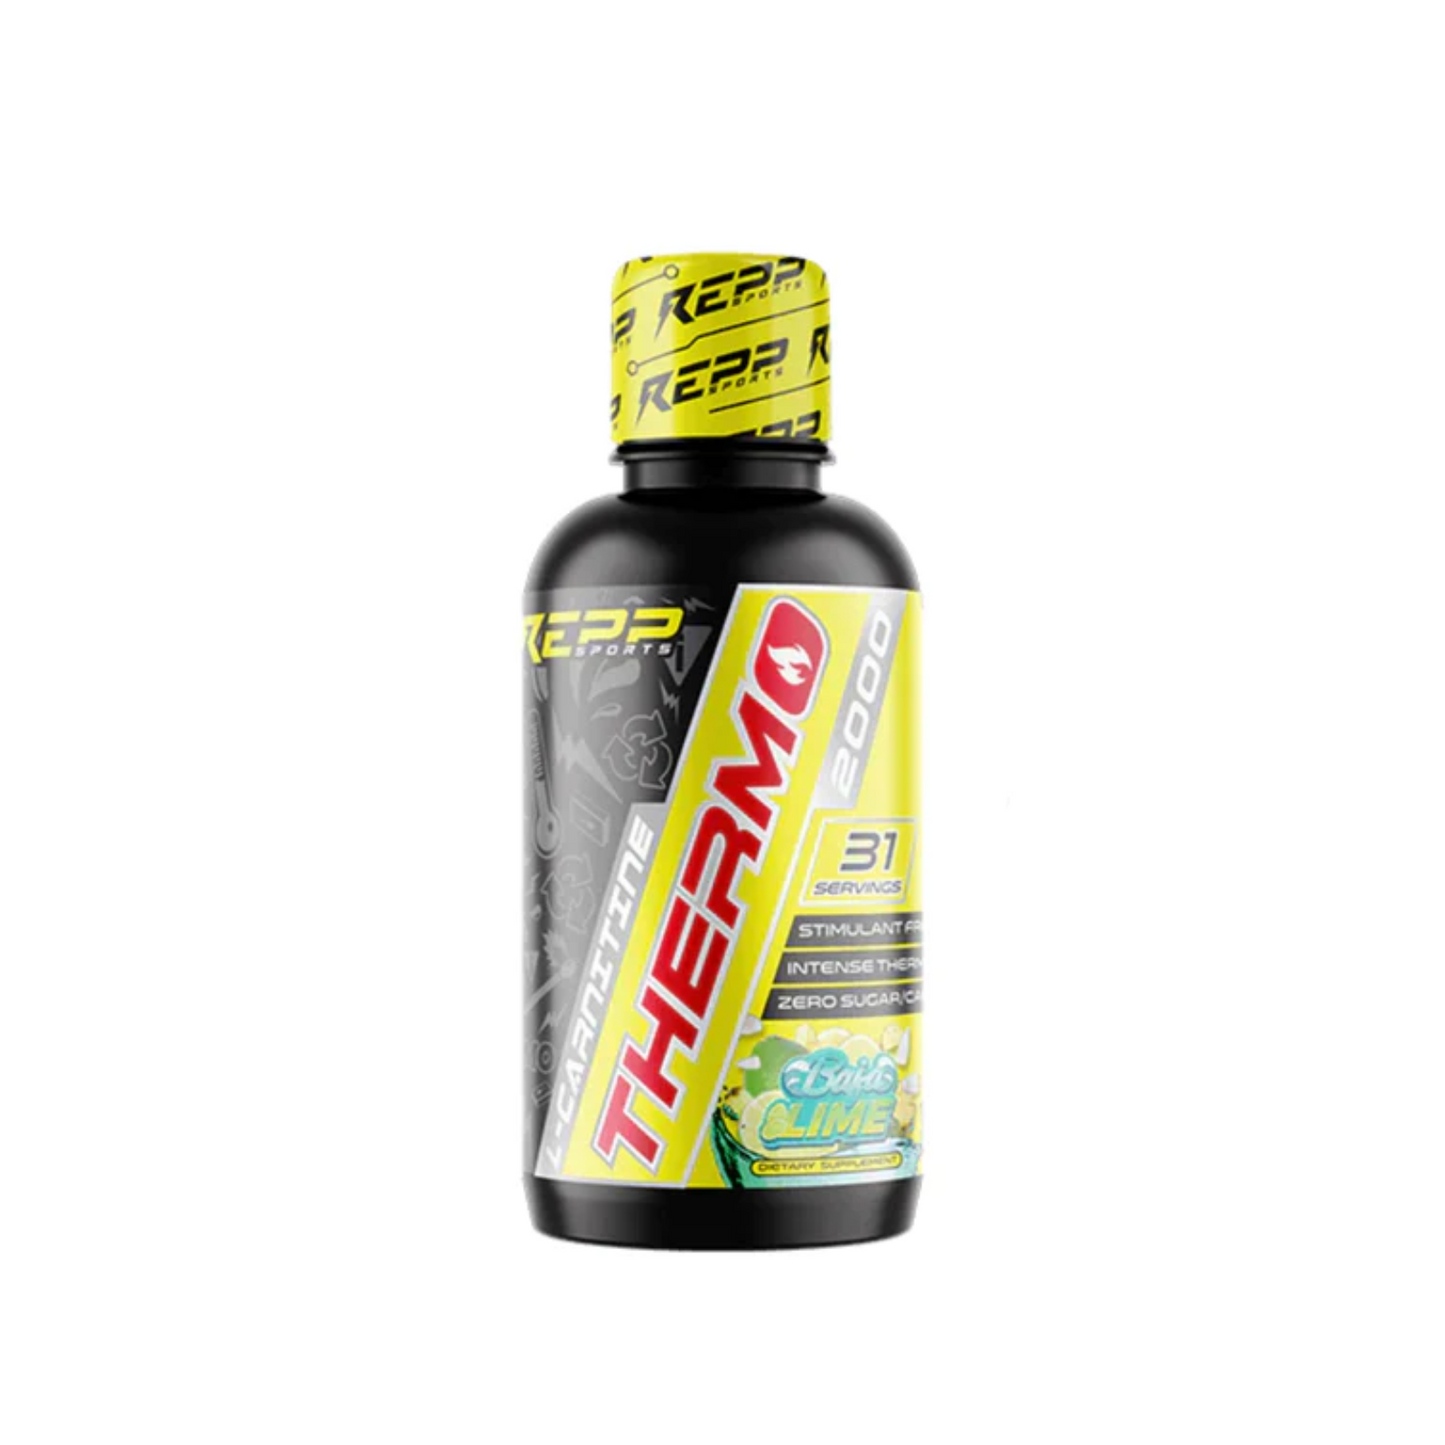 L- Carnitine Thermo 2000 Baja Lime